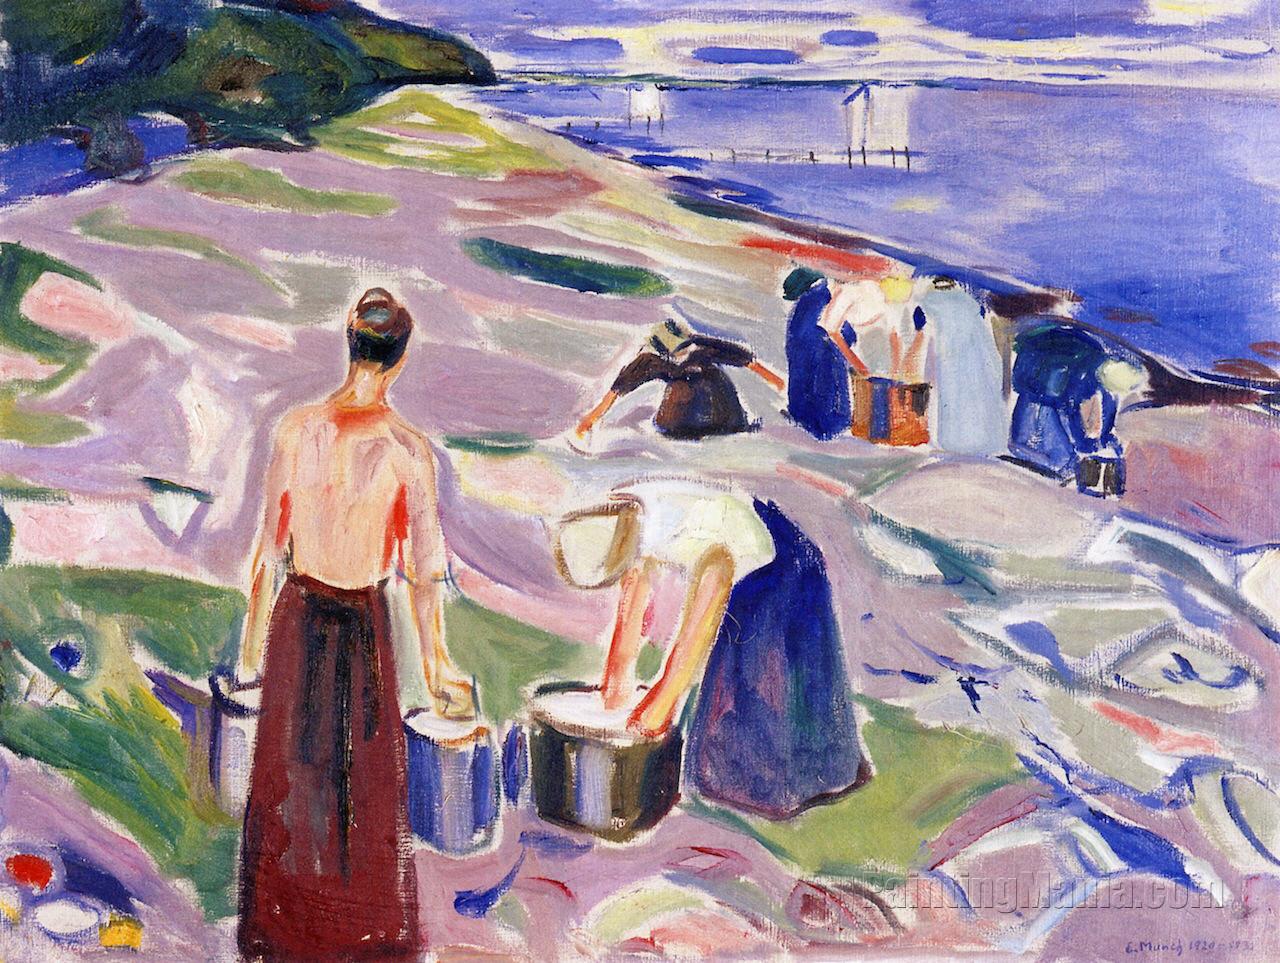 Washing Clothes by the Sea